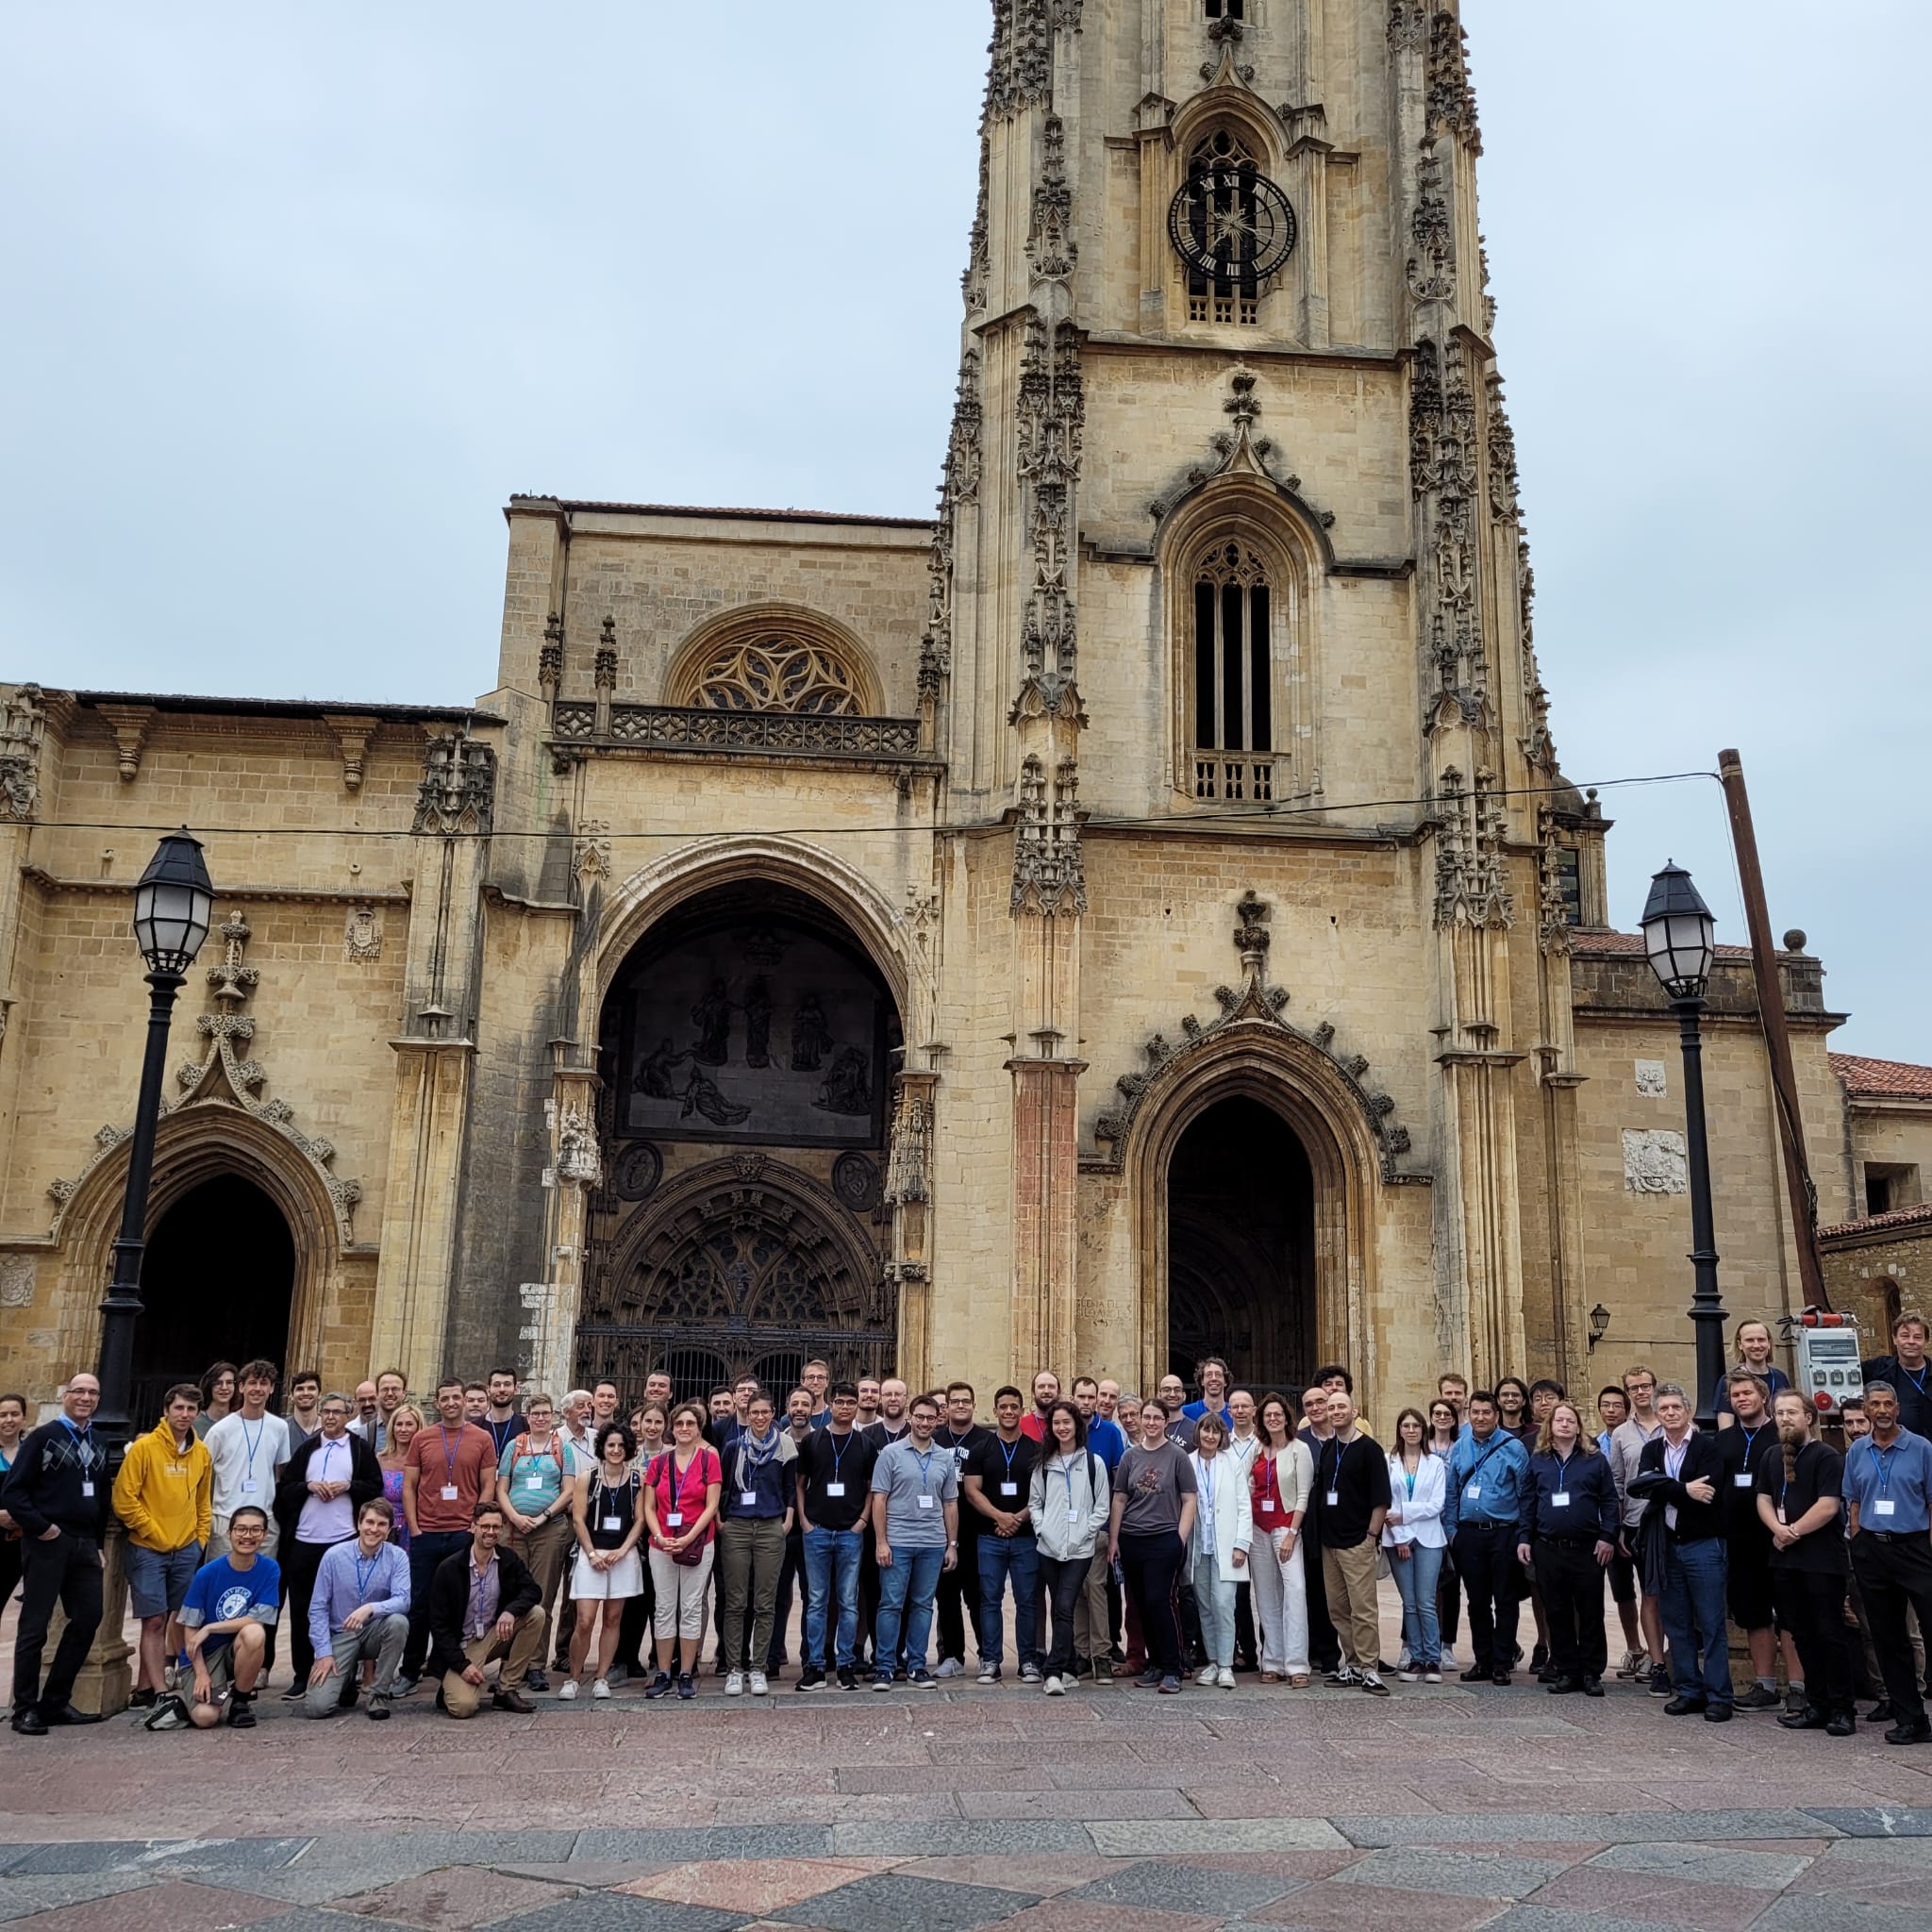 The ISIPTA 2023 participants in front of the cathedral of Oviedo during the guided tour.